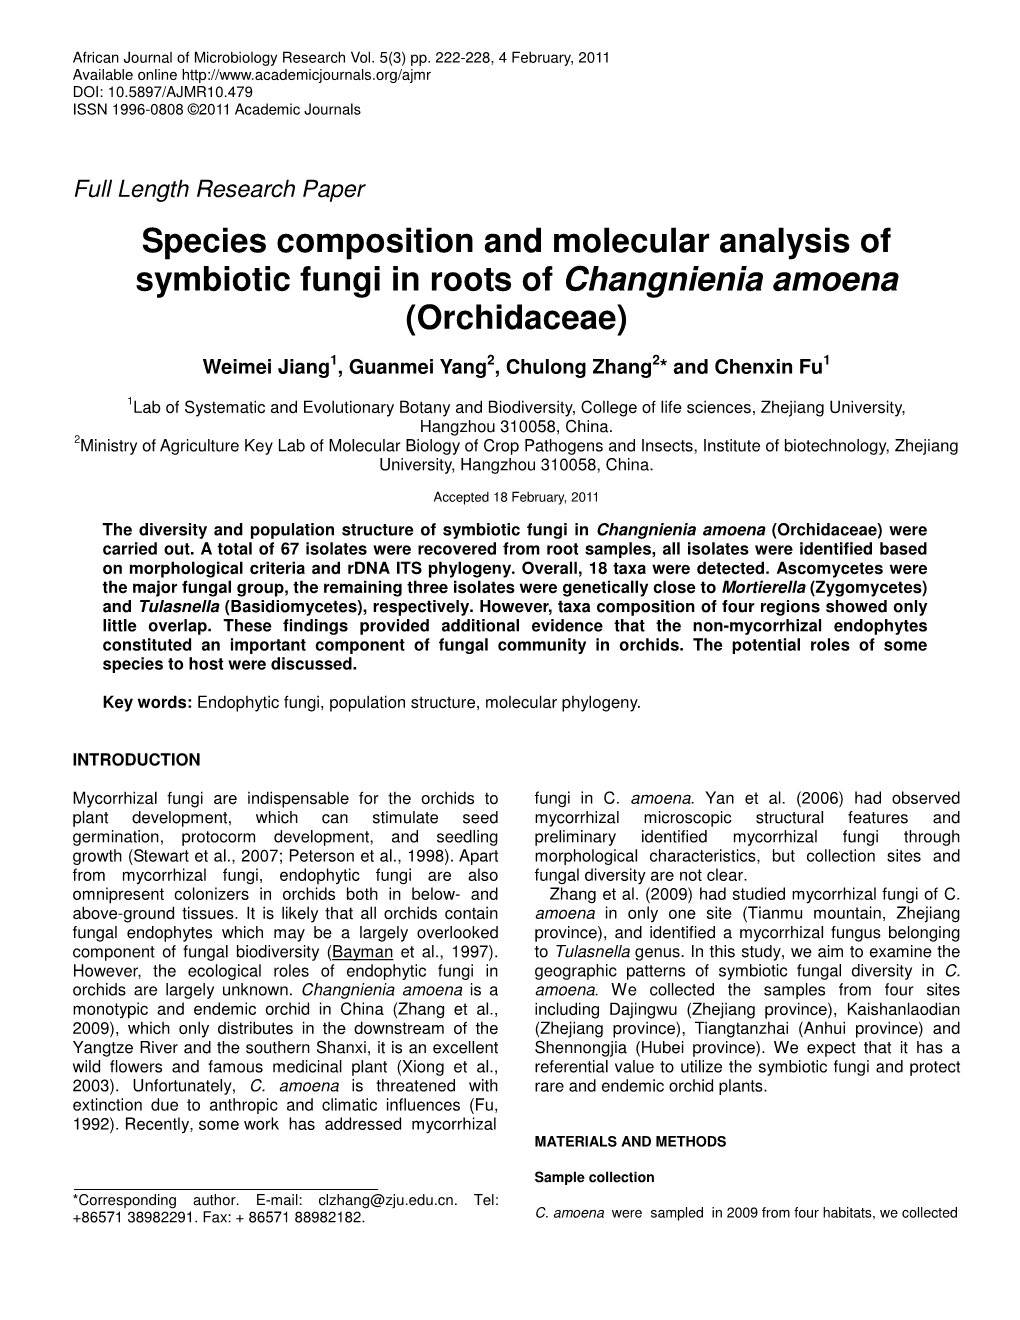 Species Composition and Molecular Analysis of Symbiotic Fungi in Roots of Changnienia Amoena (Orchidaceae)